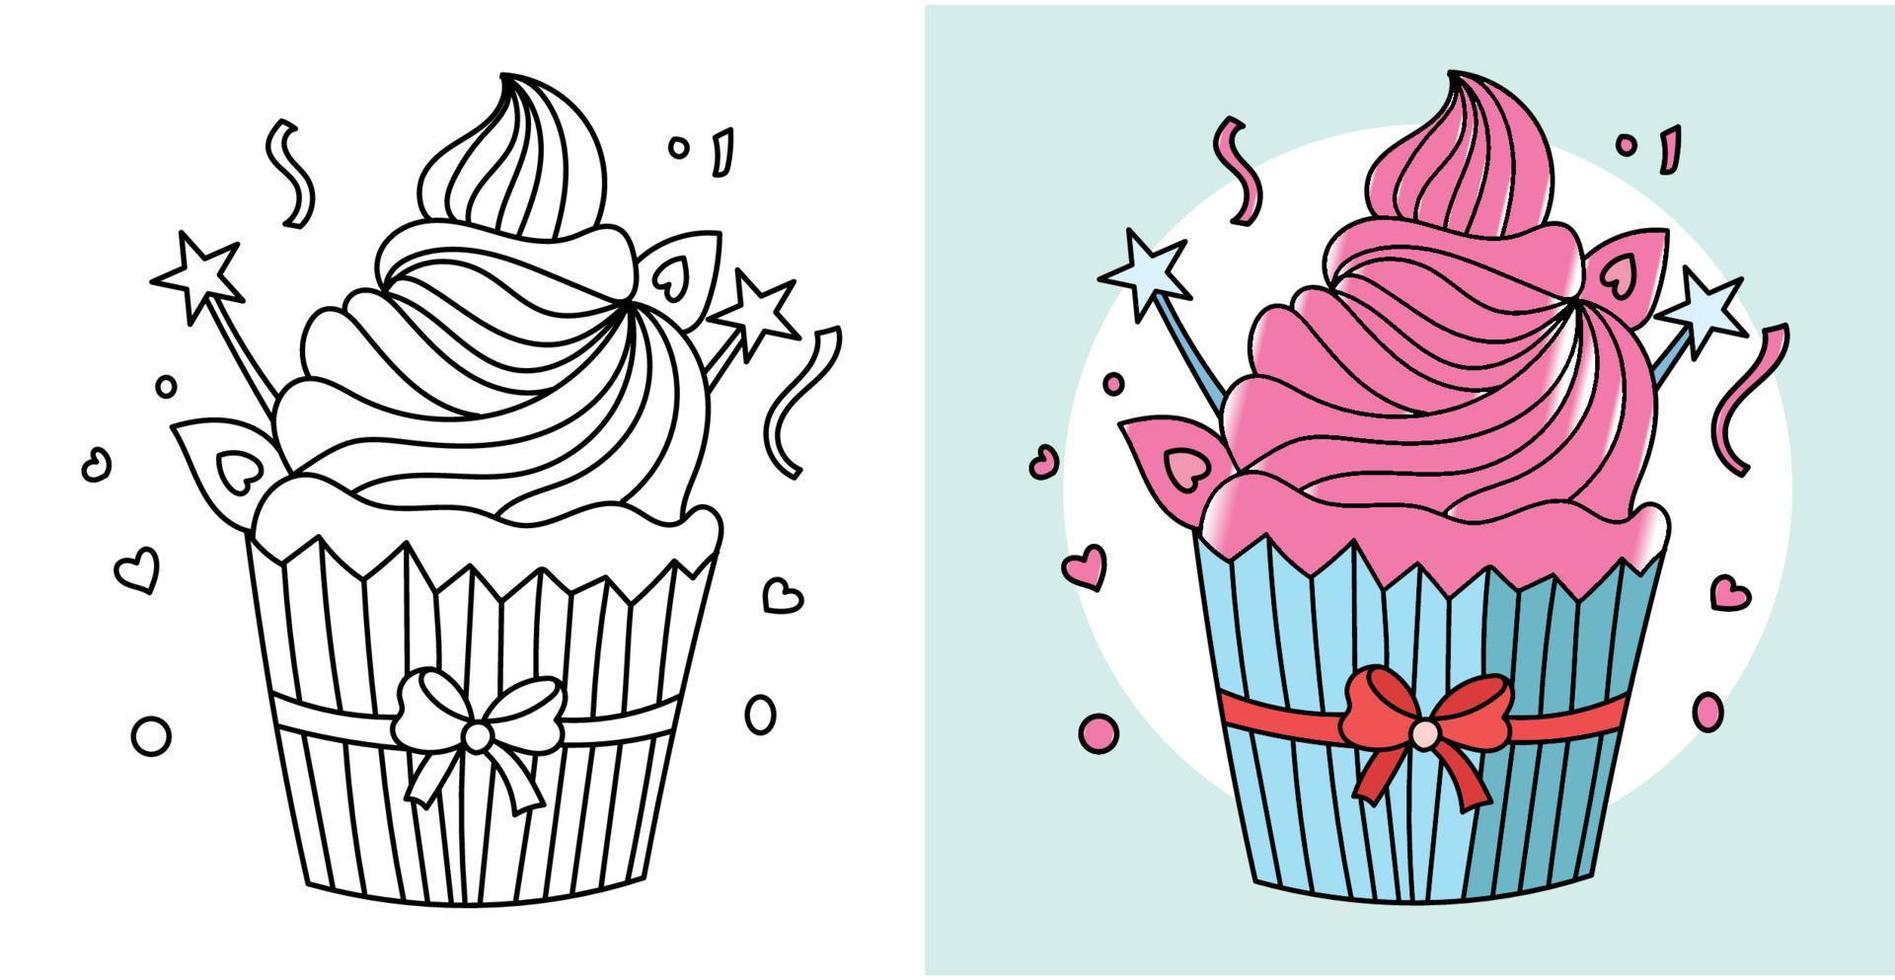 Hand-drawn outline Sweet cup cake illustration cartoon Dessert character vector coloring page for kids